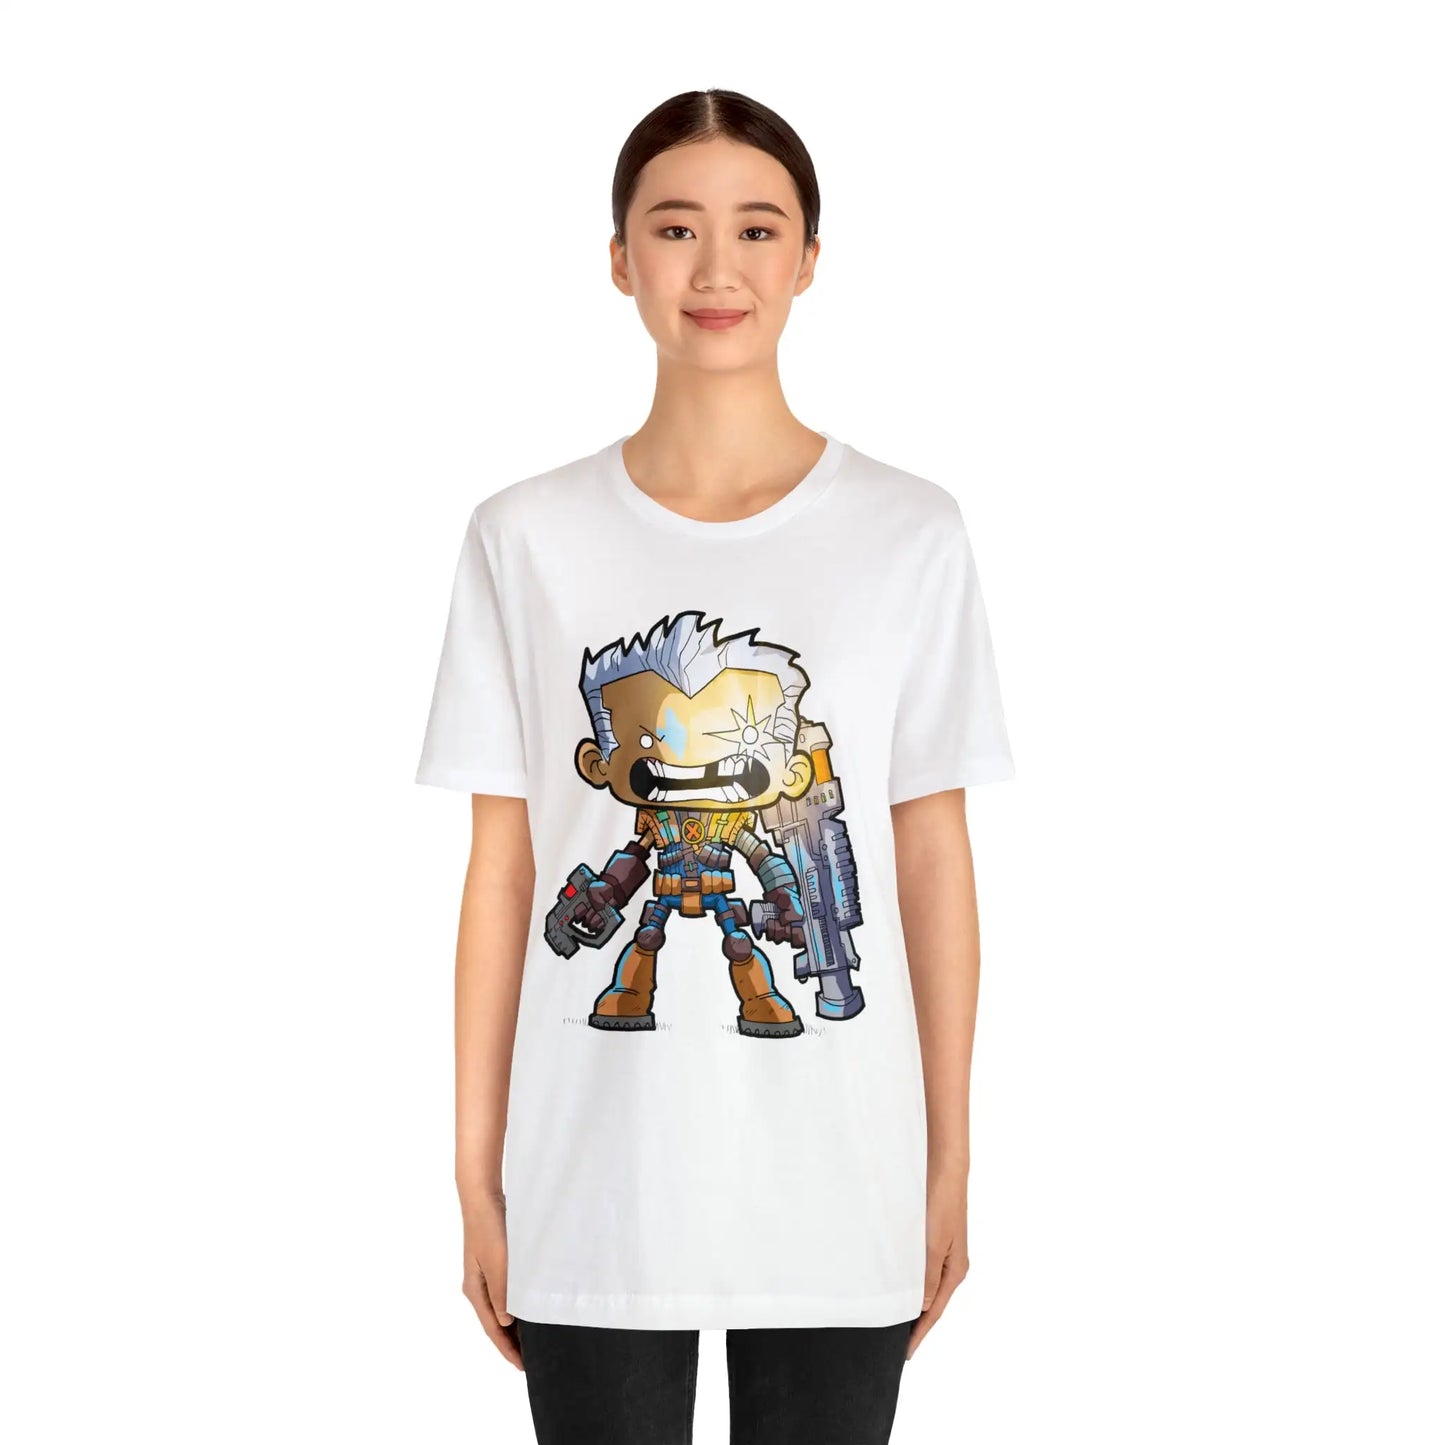 Cable X-Force X-Men T-Shirt Cartoon Gift Tee Unisex For Men and Women